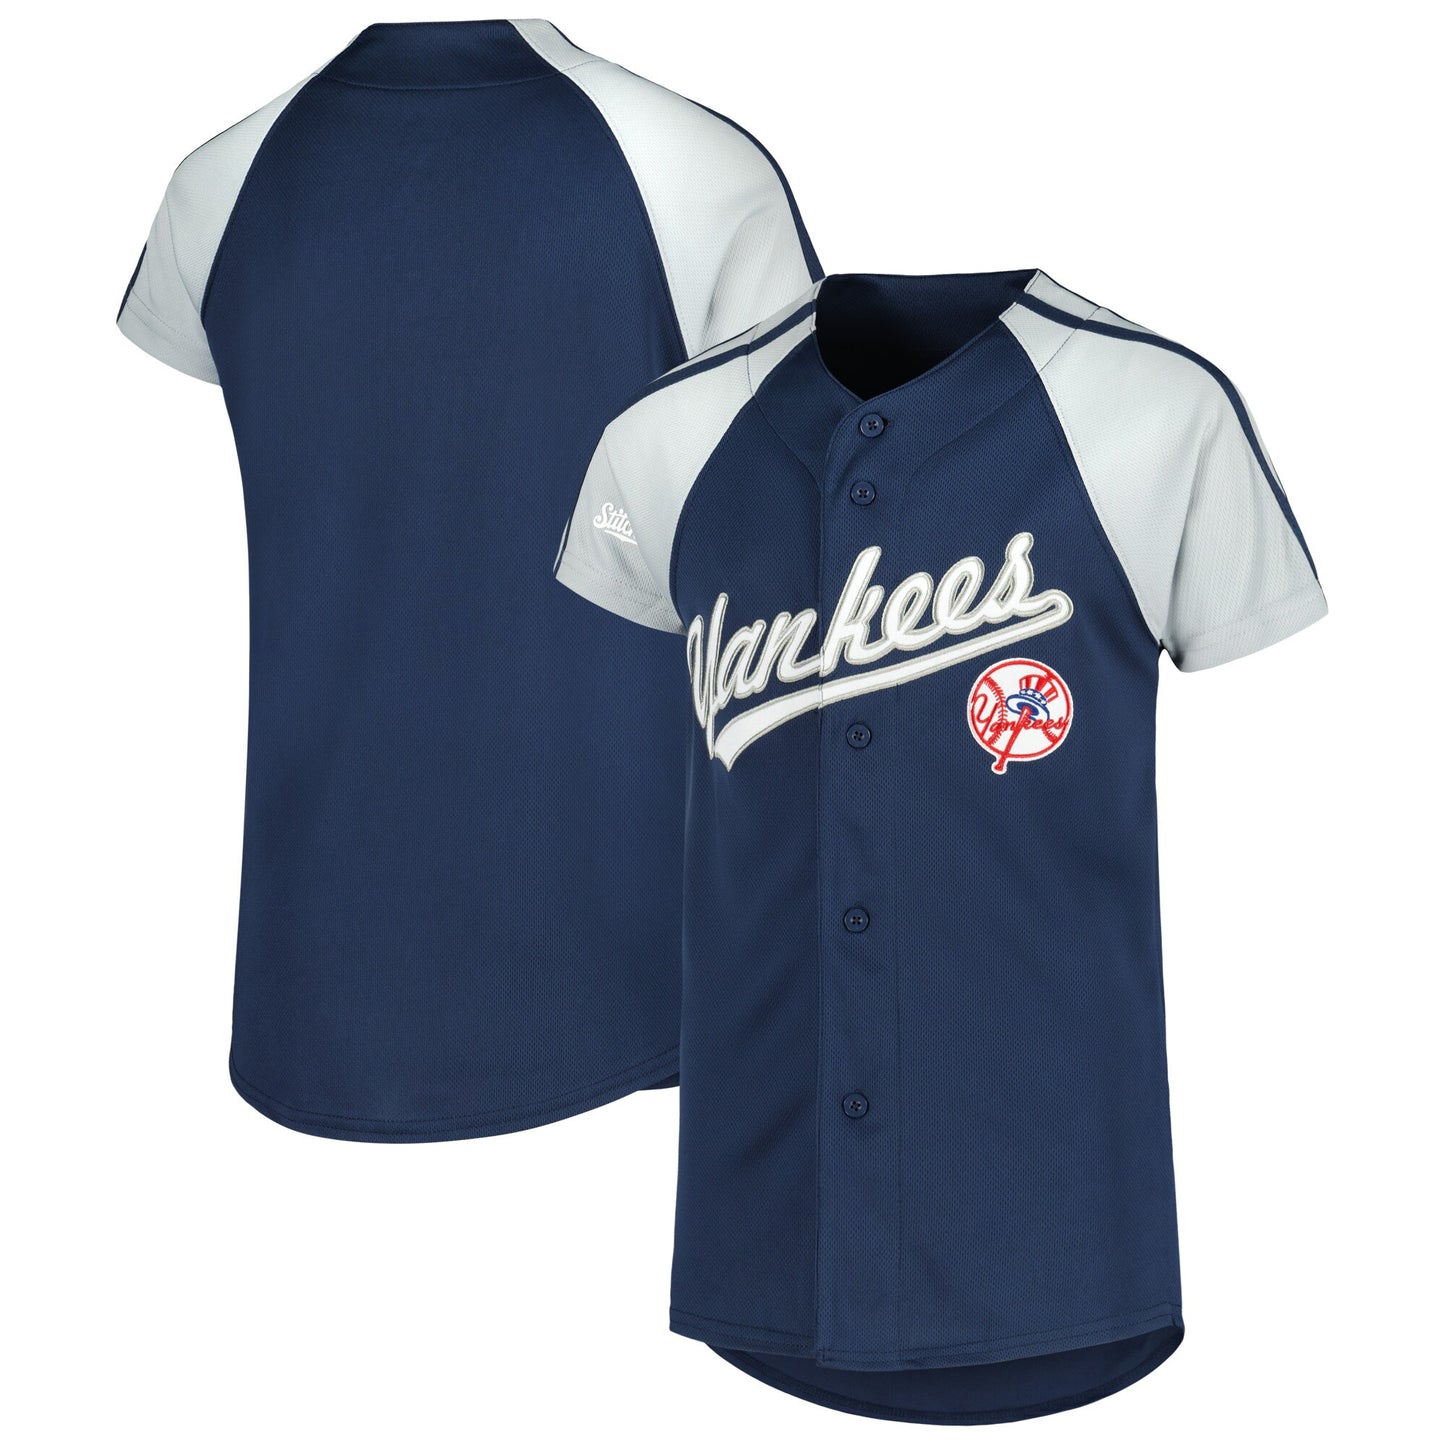 New York Yankees Stitches Youth Team Jersey - Navy/Gray